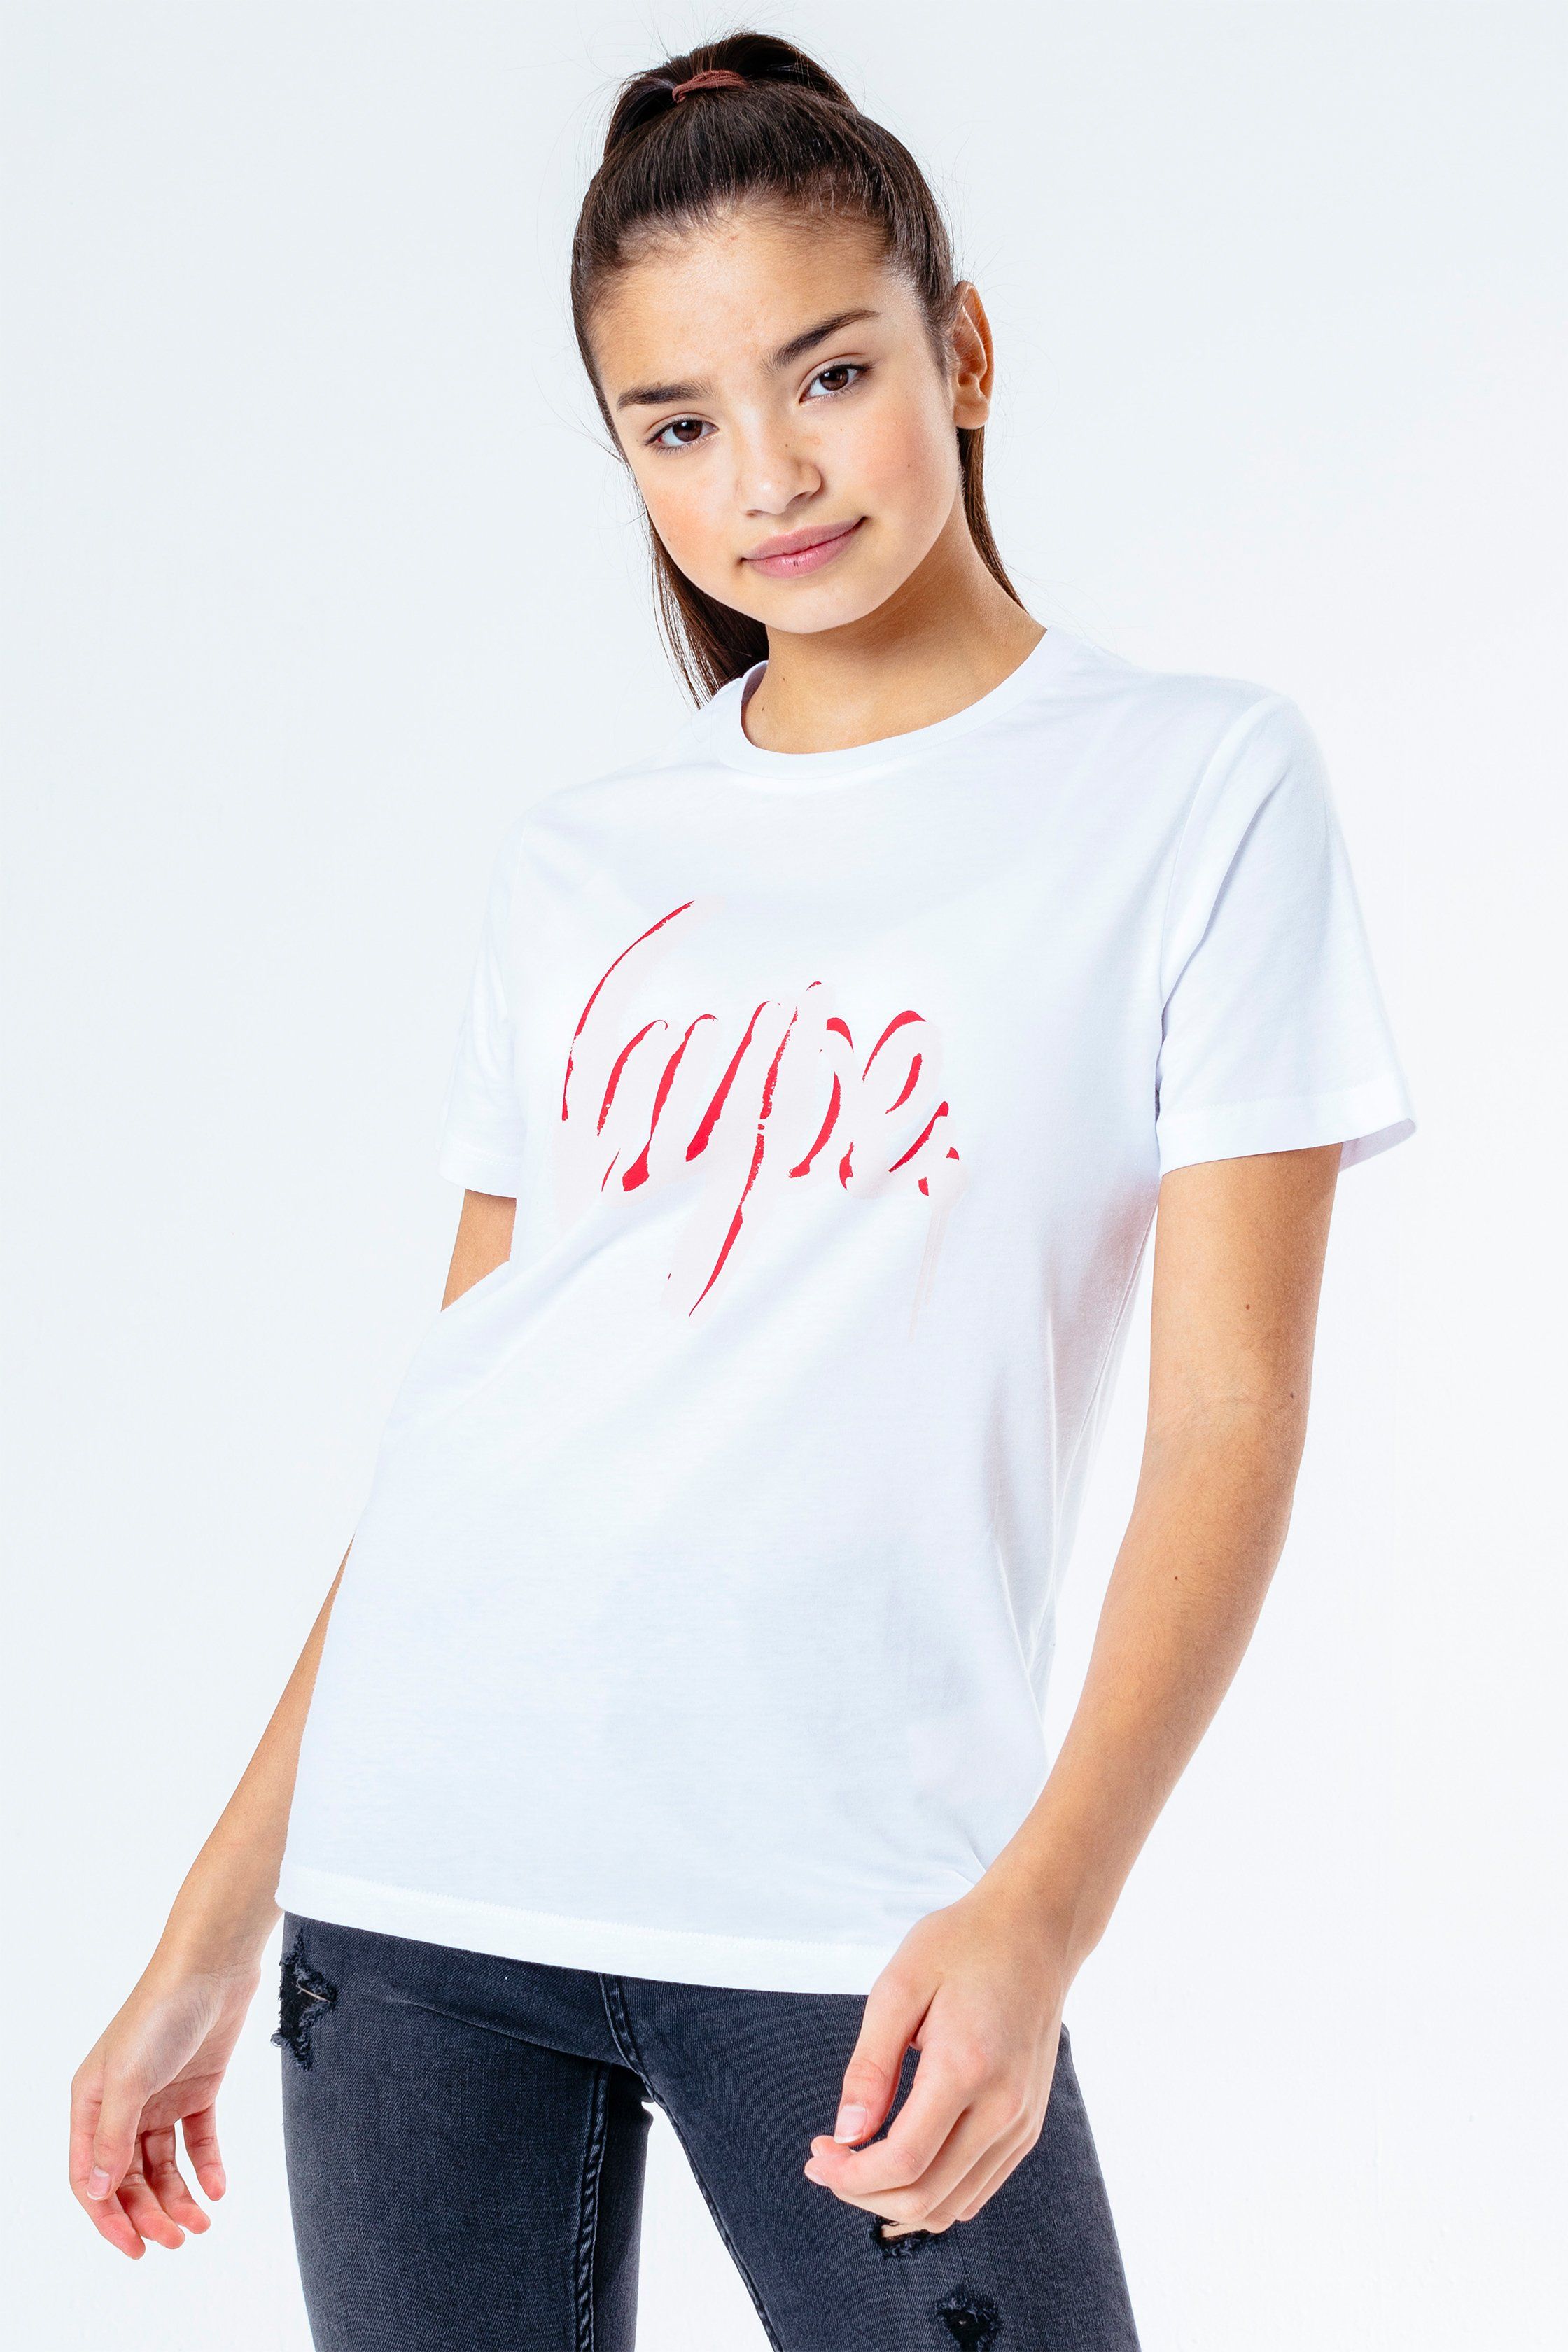 The HYPE. Spray Script kids t-shirt features a white, dark and light pink colour palette. Designed in a 100% cotton fabric base for the ultimate comfort in our standard unisex kids tee shape with a crew neckline and short sleeves. The design features our iconic HYPE. script logo with a graffiti-spray inspired overlay across the front. Wear with kids joggers for a 'Netflix n Chill' Sunday, or opt for denim jeans when you've got plans. Machine wash at 30 degrees.